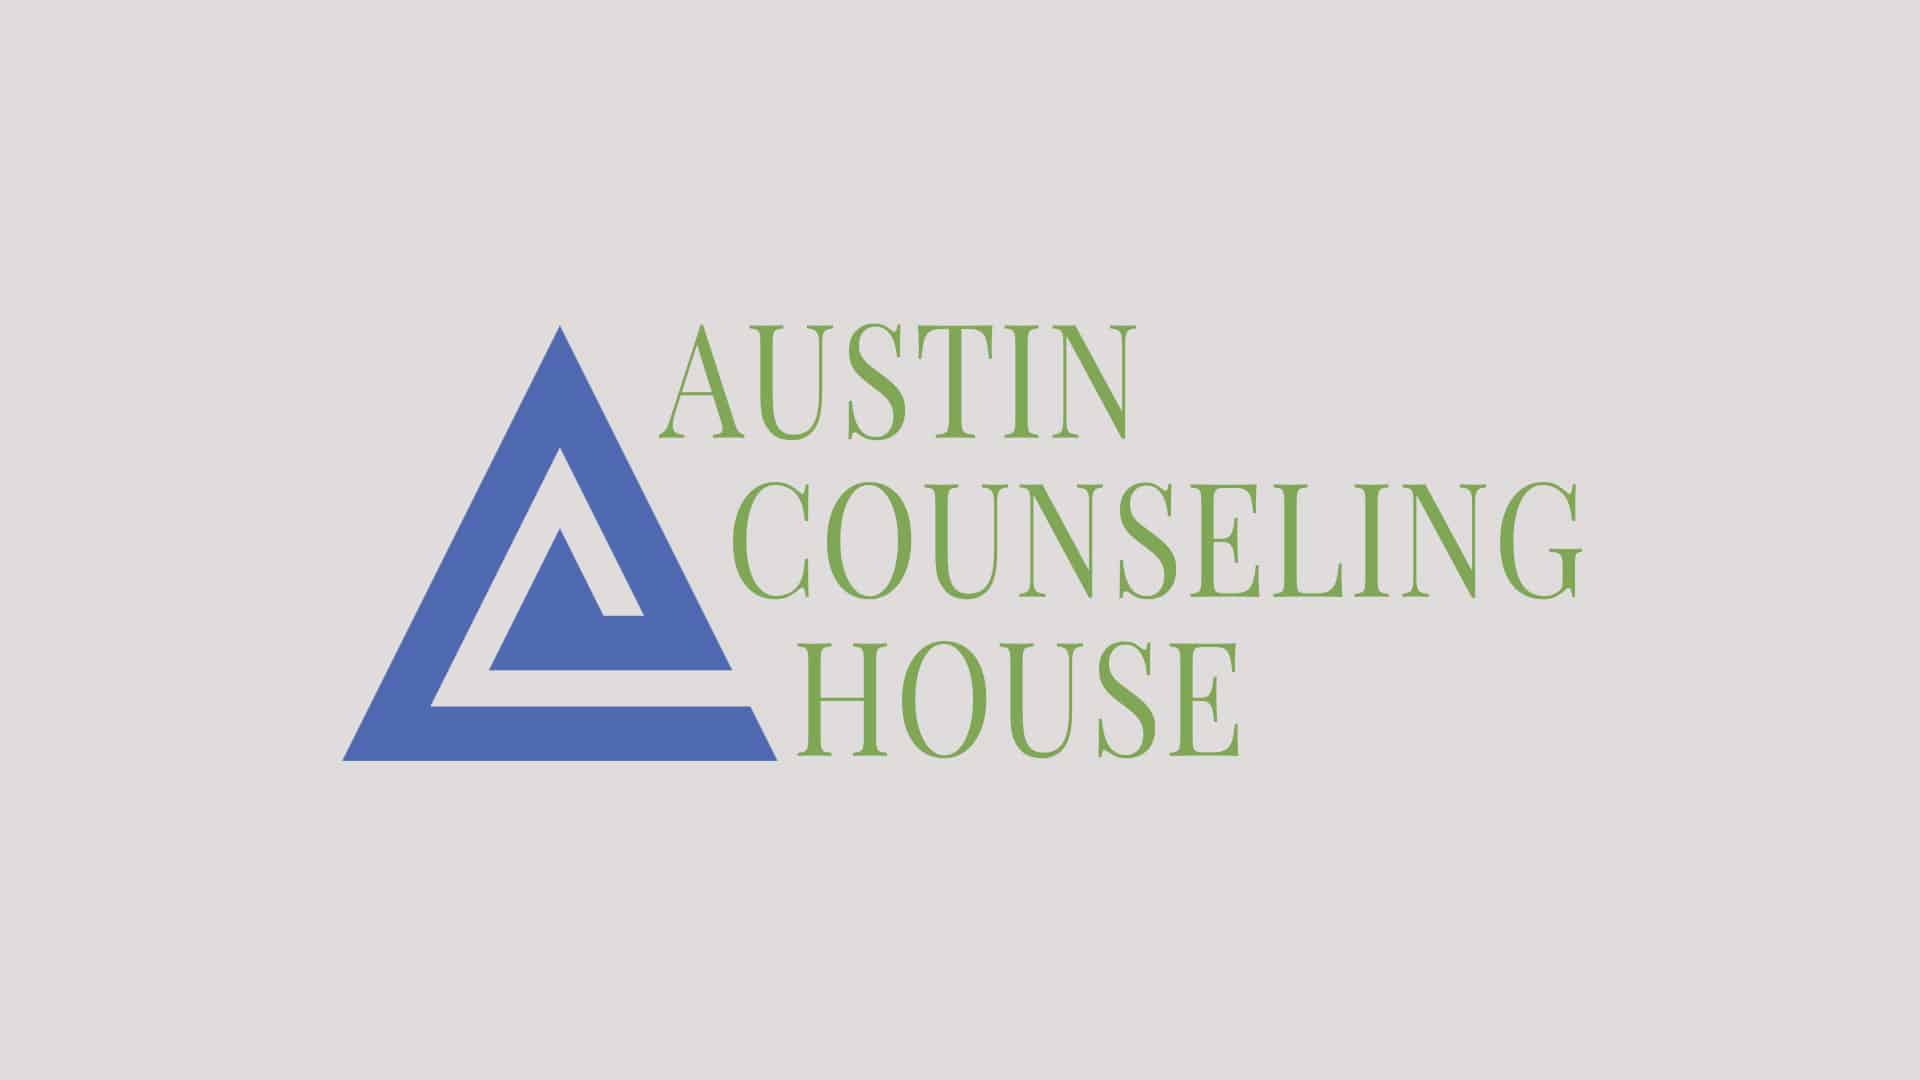 Austin Counseling House